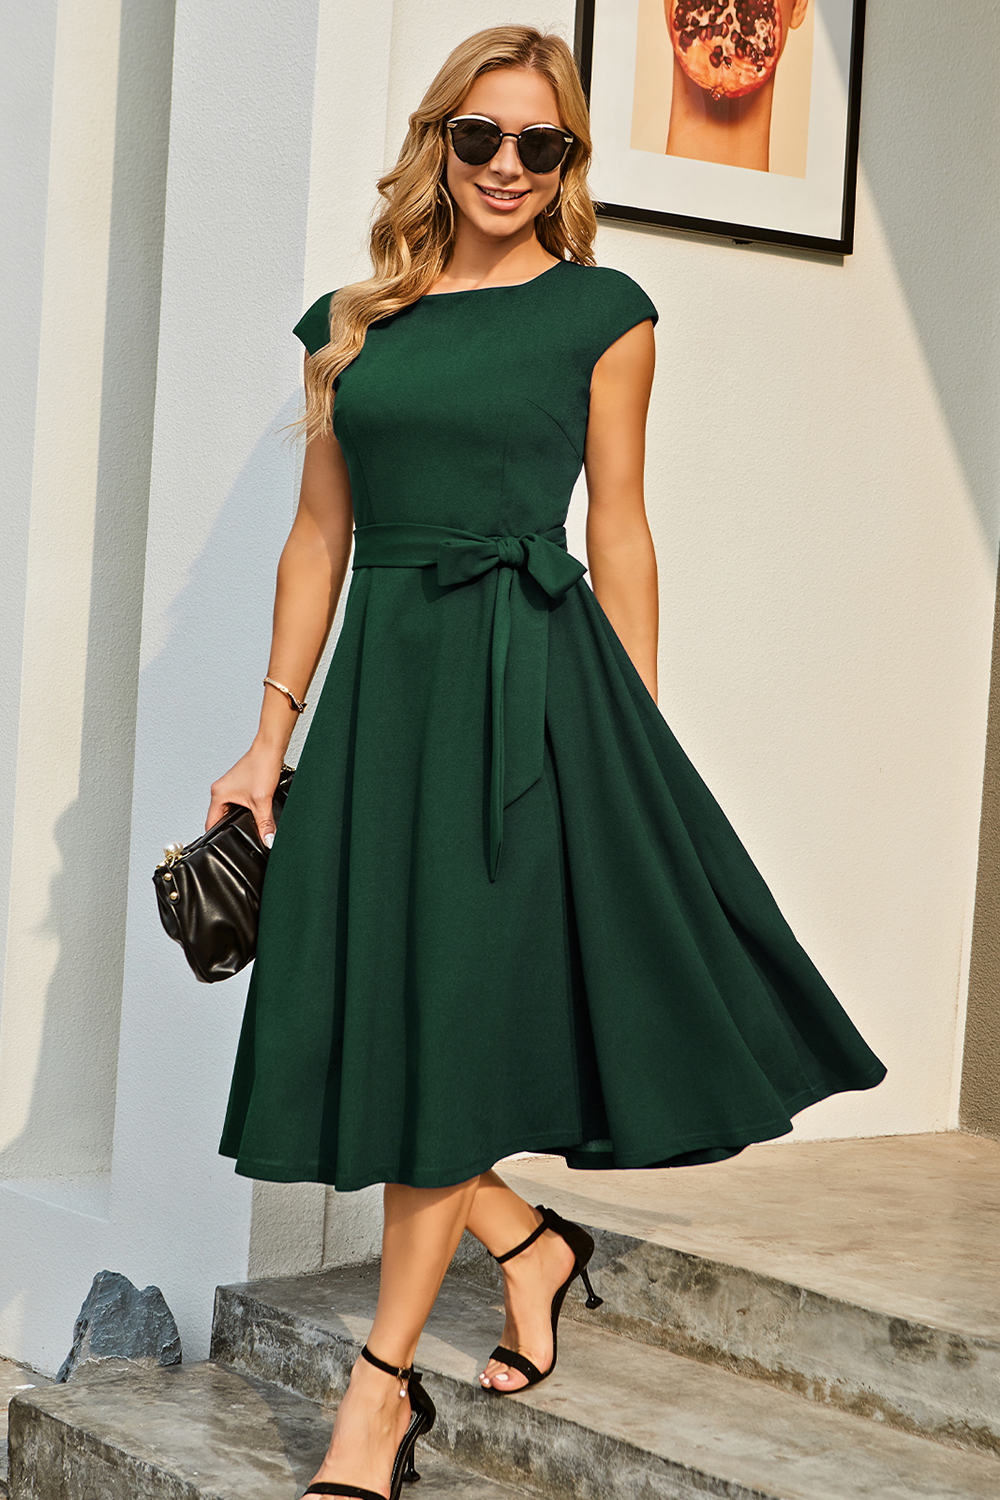 A-Line Knee-Length Darkgreen Cocktail Dress with Cap Sleeves, Vintage Style, Unique and Elegant